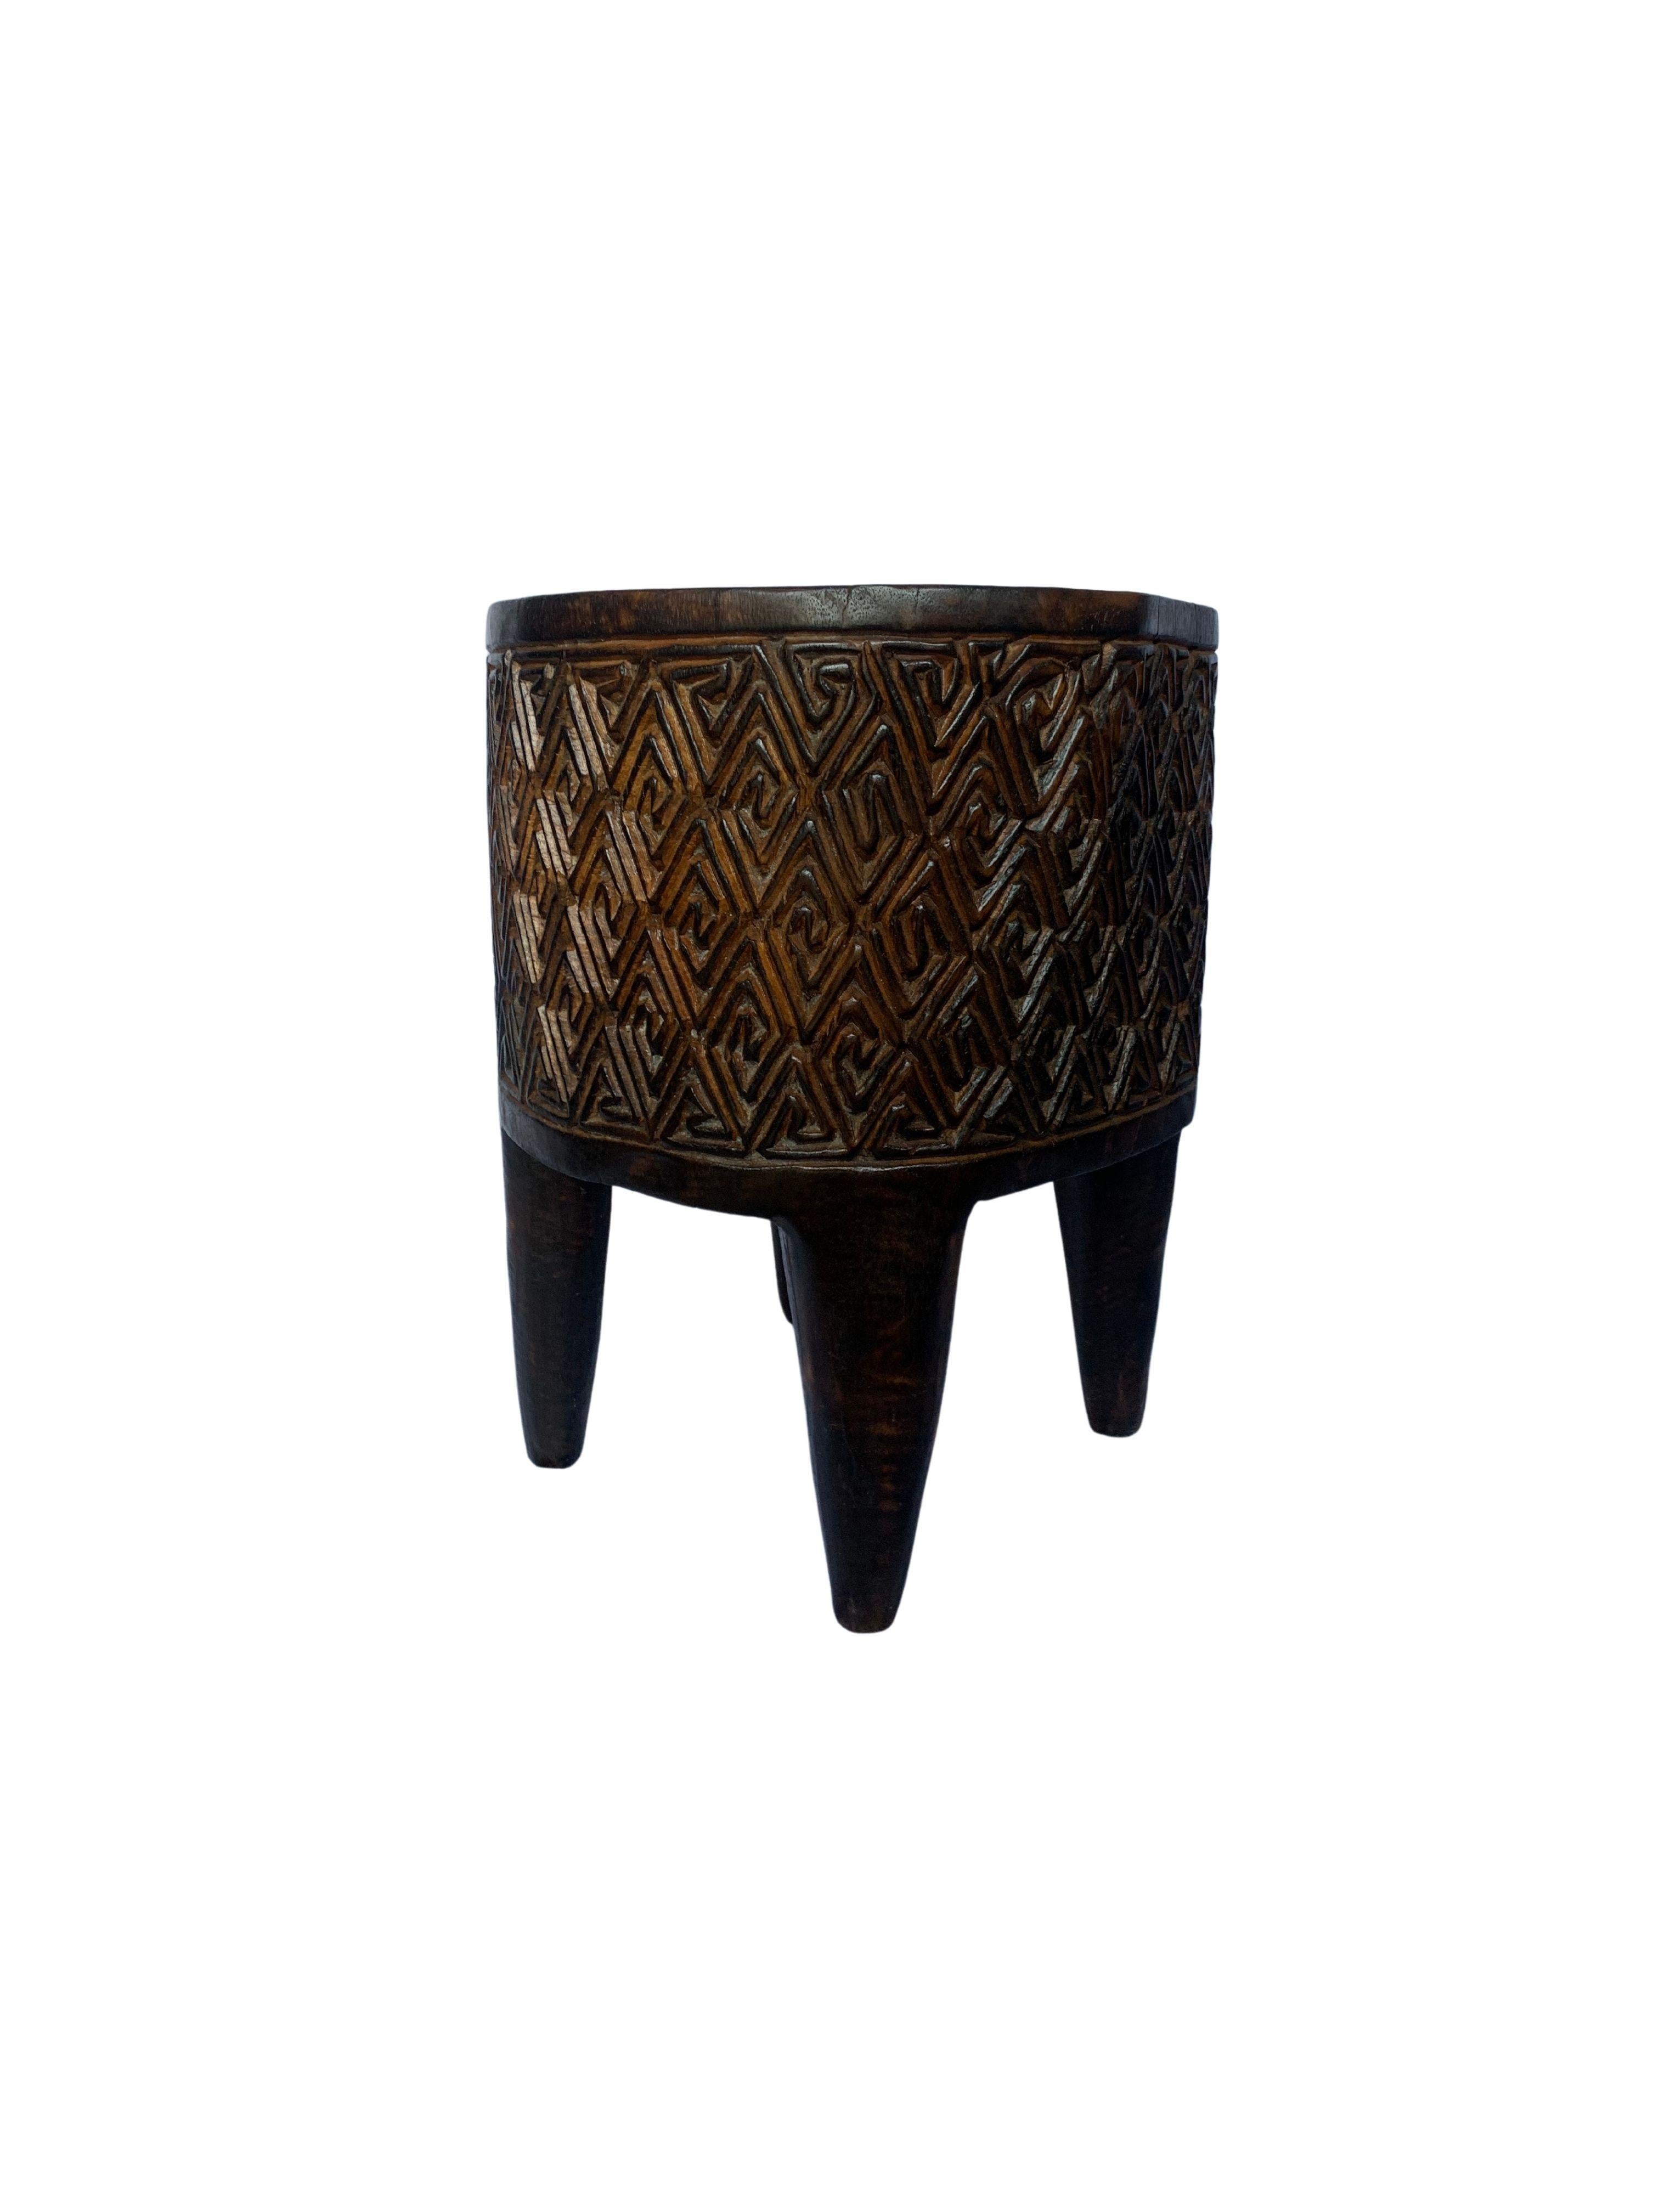 Hand-Crafted Sculptural Side Table Solid Mango Wood, Carved Detailing For Sale